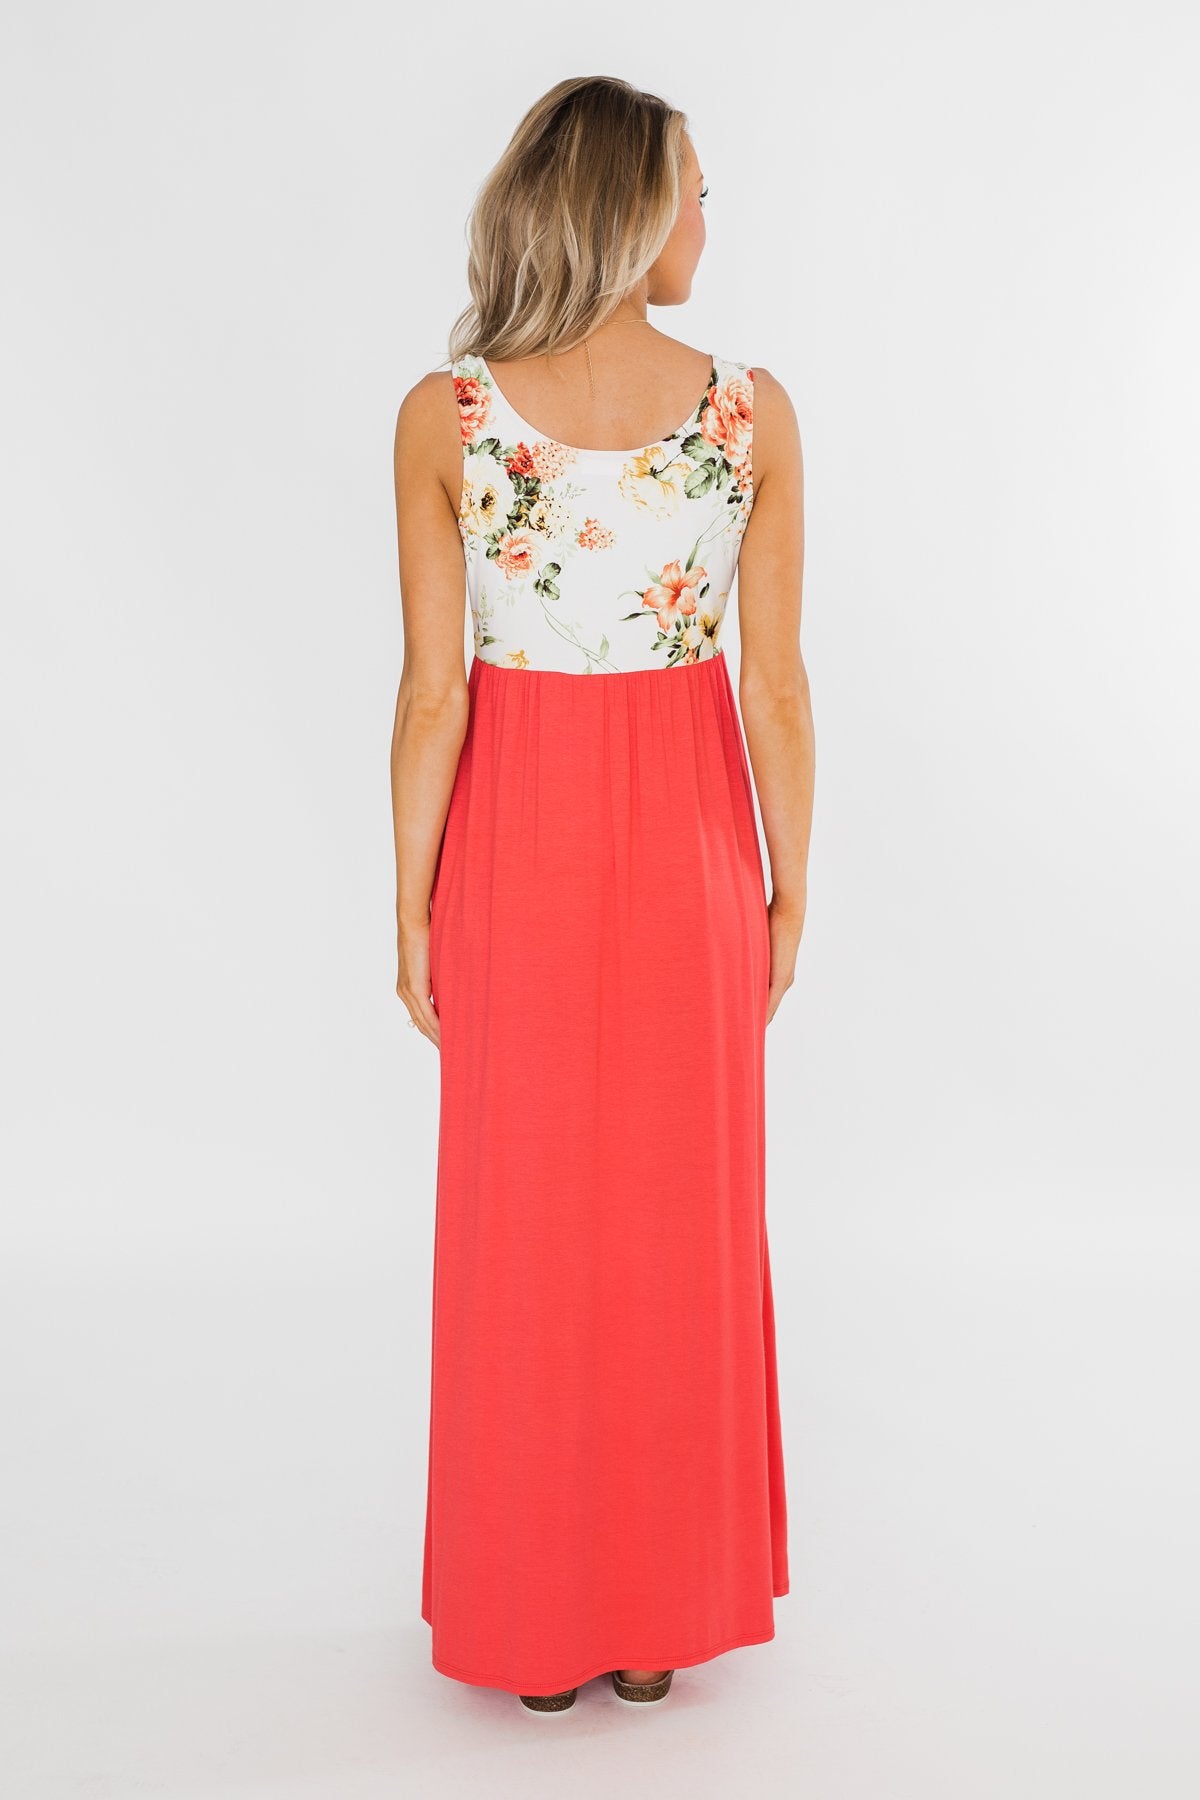 There She Goes Again Floral Maxi Dress- Vibrant Coral